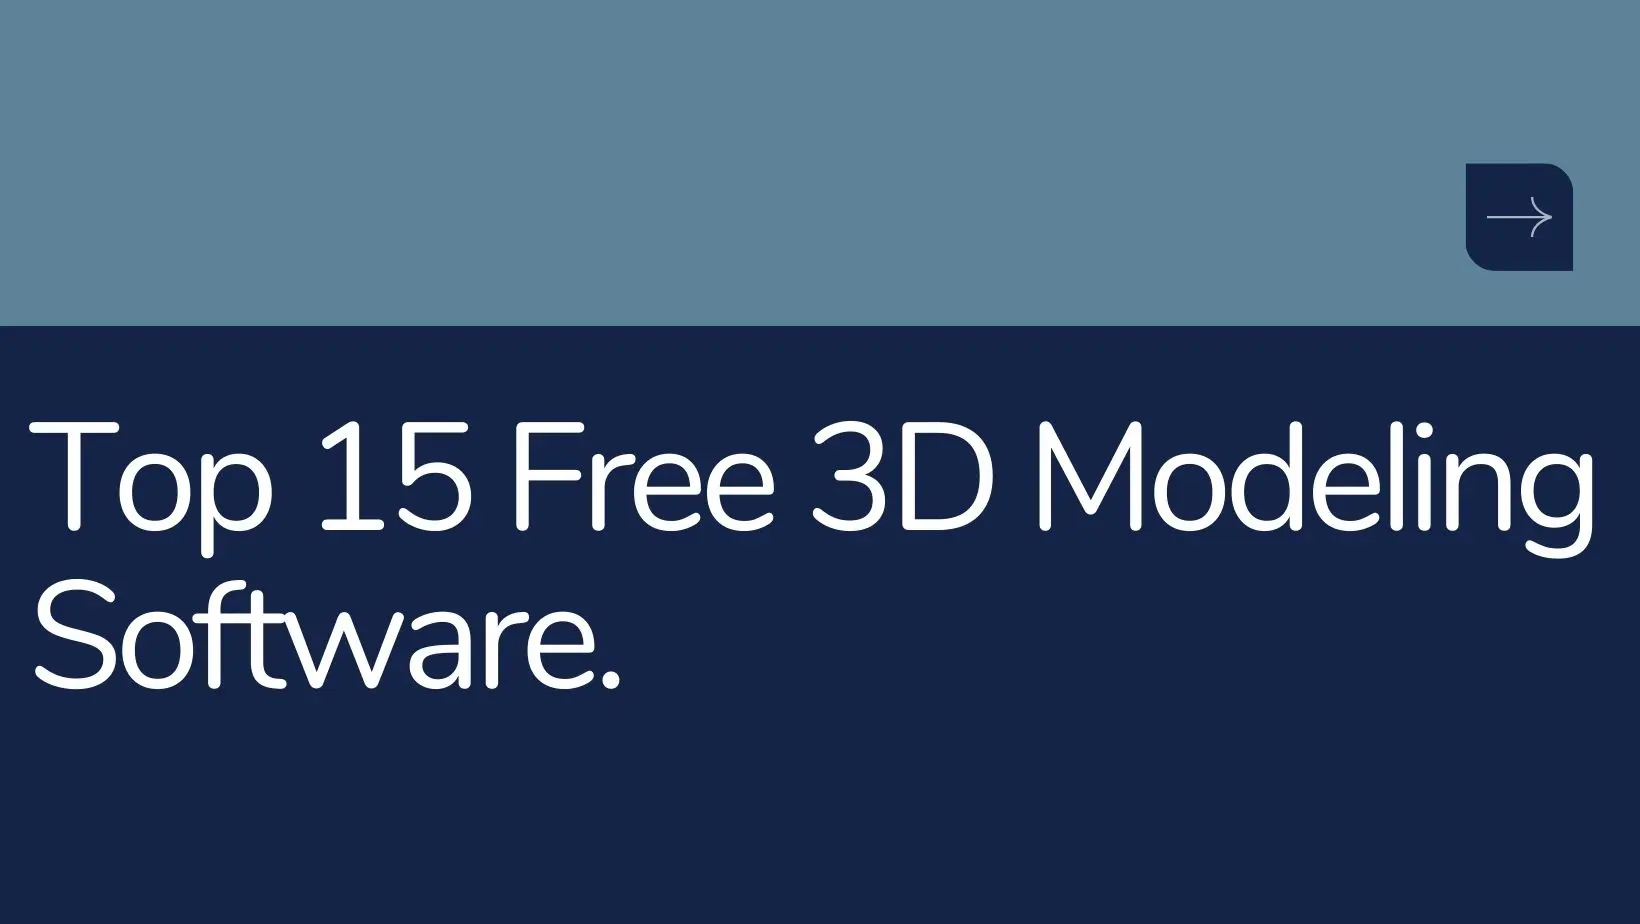 Top 15 Free 3D Modeling Software.